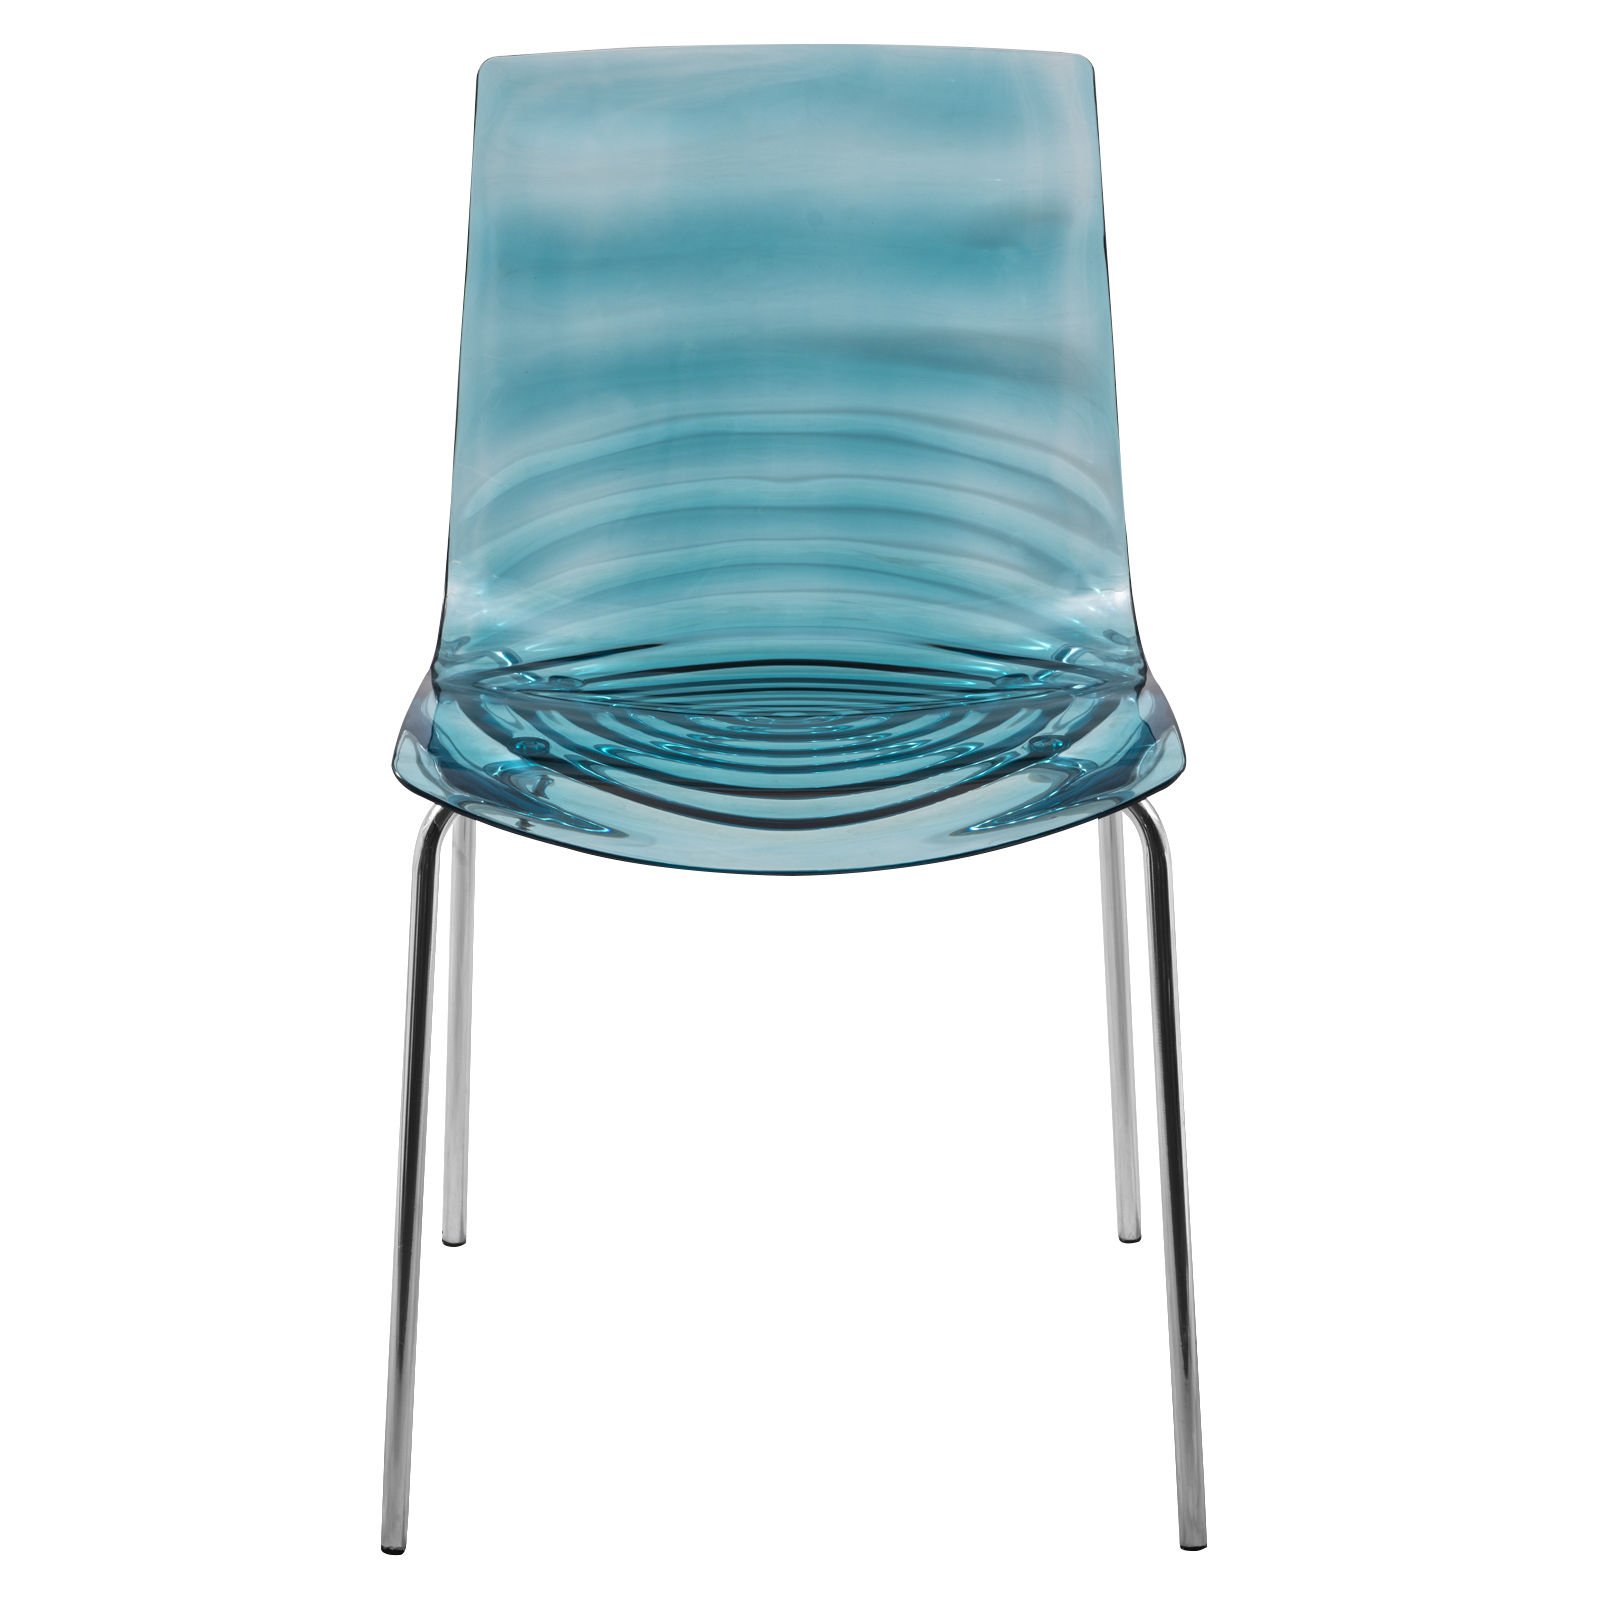 LeisureMod Astor Water Ripple Design Modern Lucite Dining Side Chair with Metal Legs, Transparent Blue